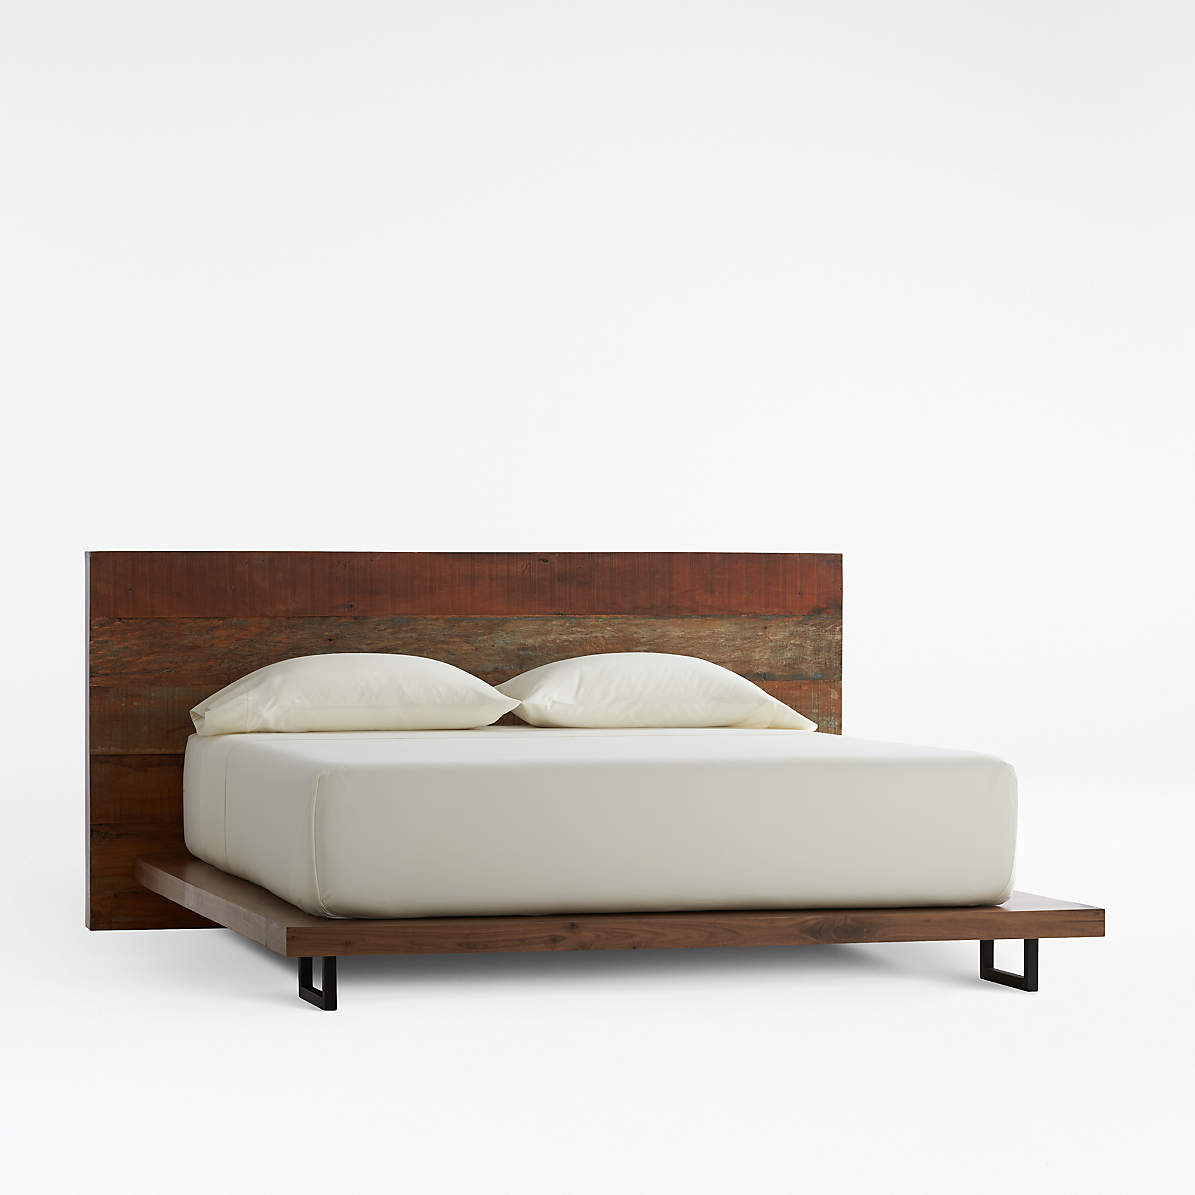 Atwood Reclaimed Wood Queen Bed, King Bed Without Frame